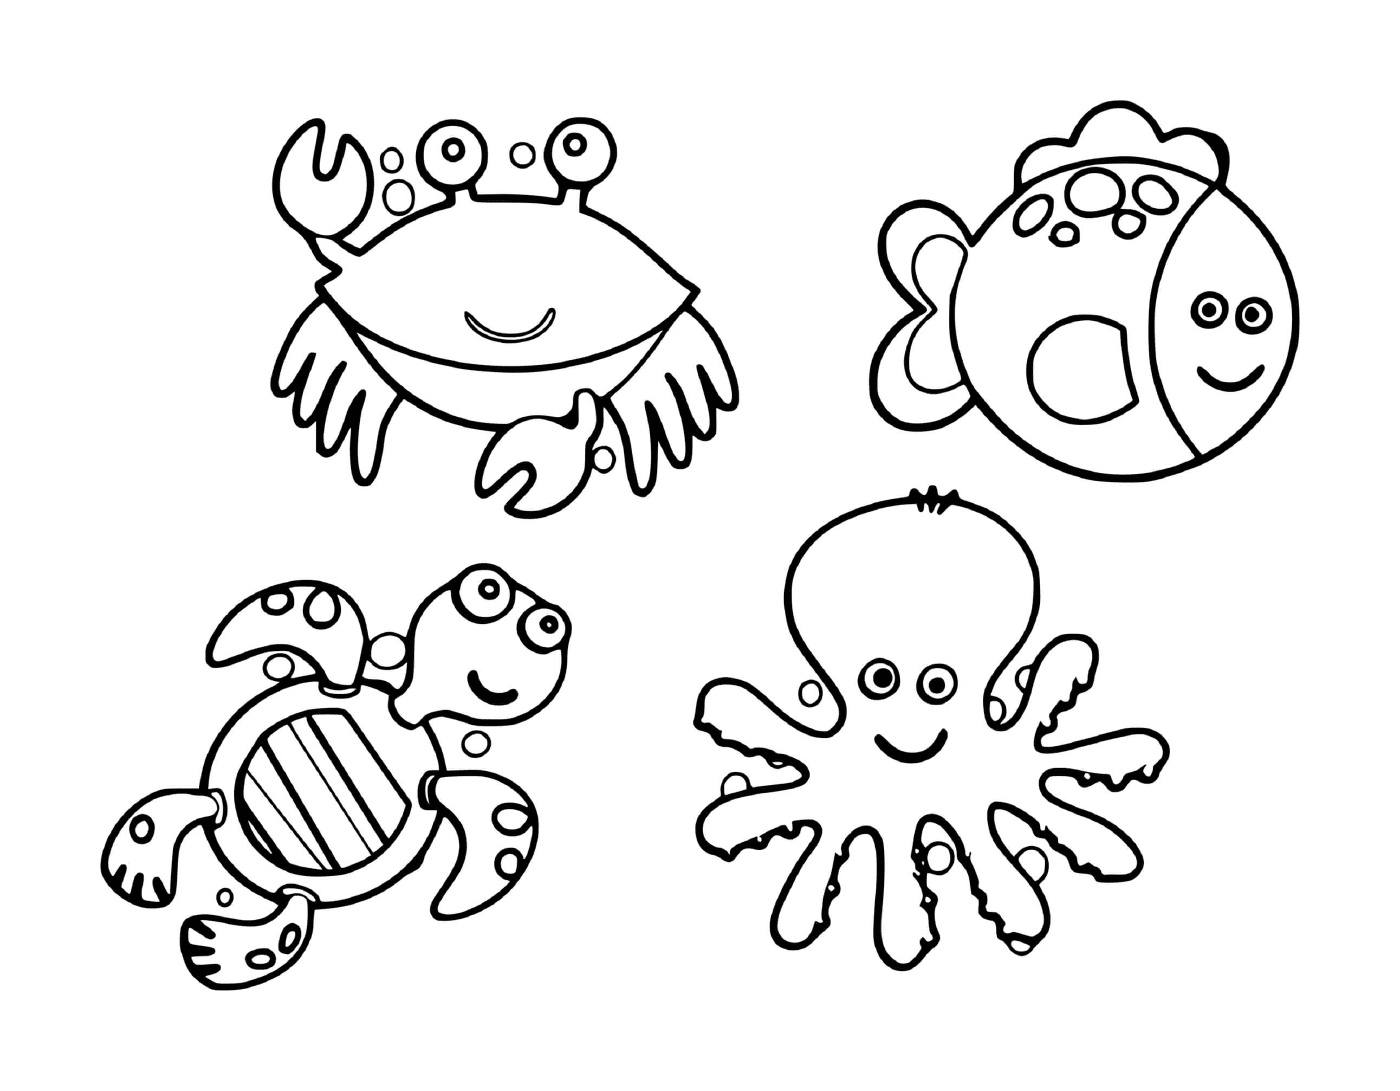  a group of marine animals in the water, including fish, crabs, turtles and octopus 